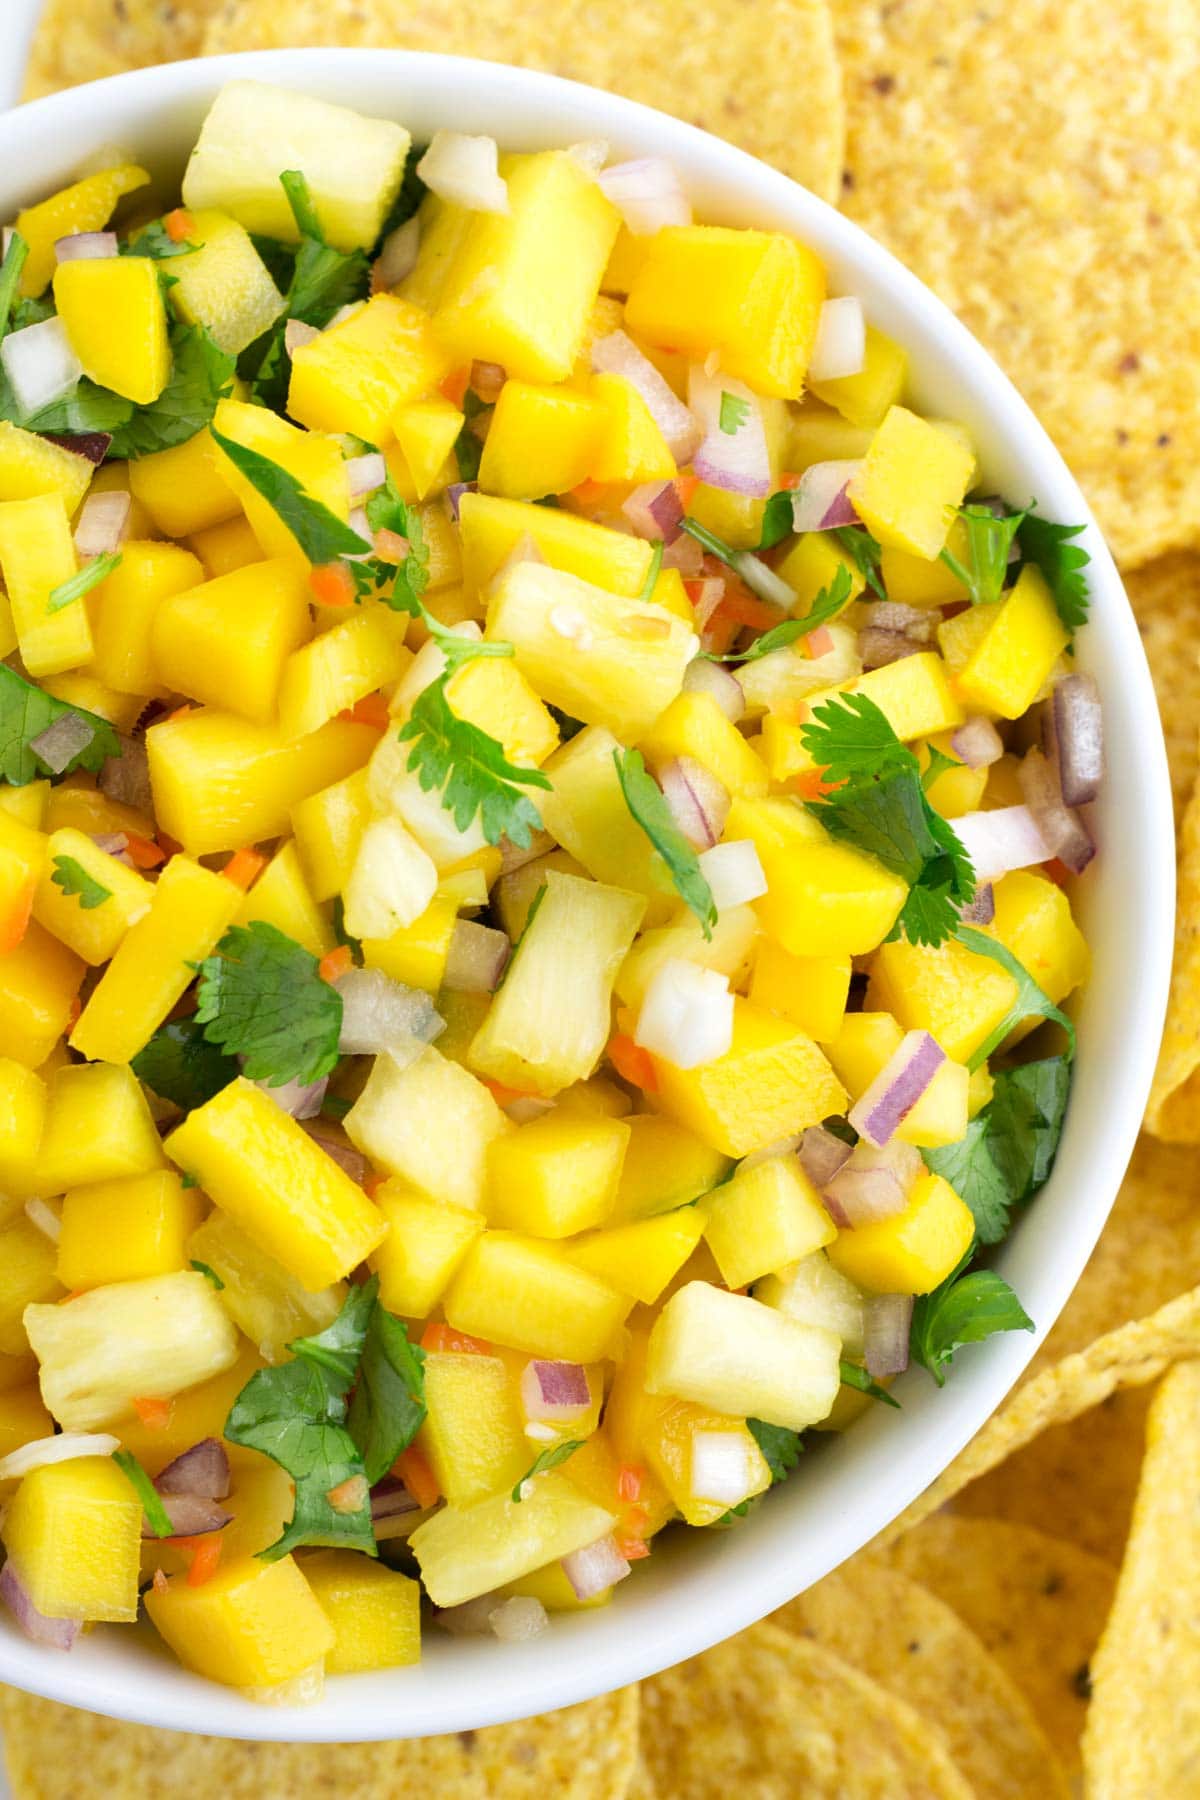 Chopped mango salsa ingredients in a bowl with chips on a platter.